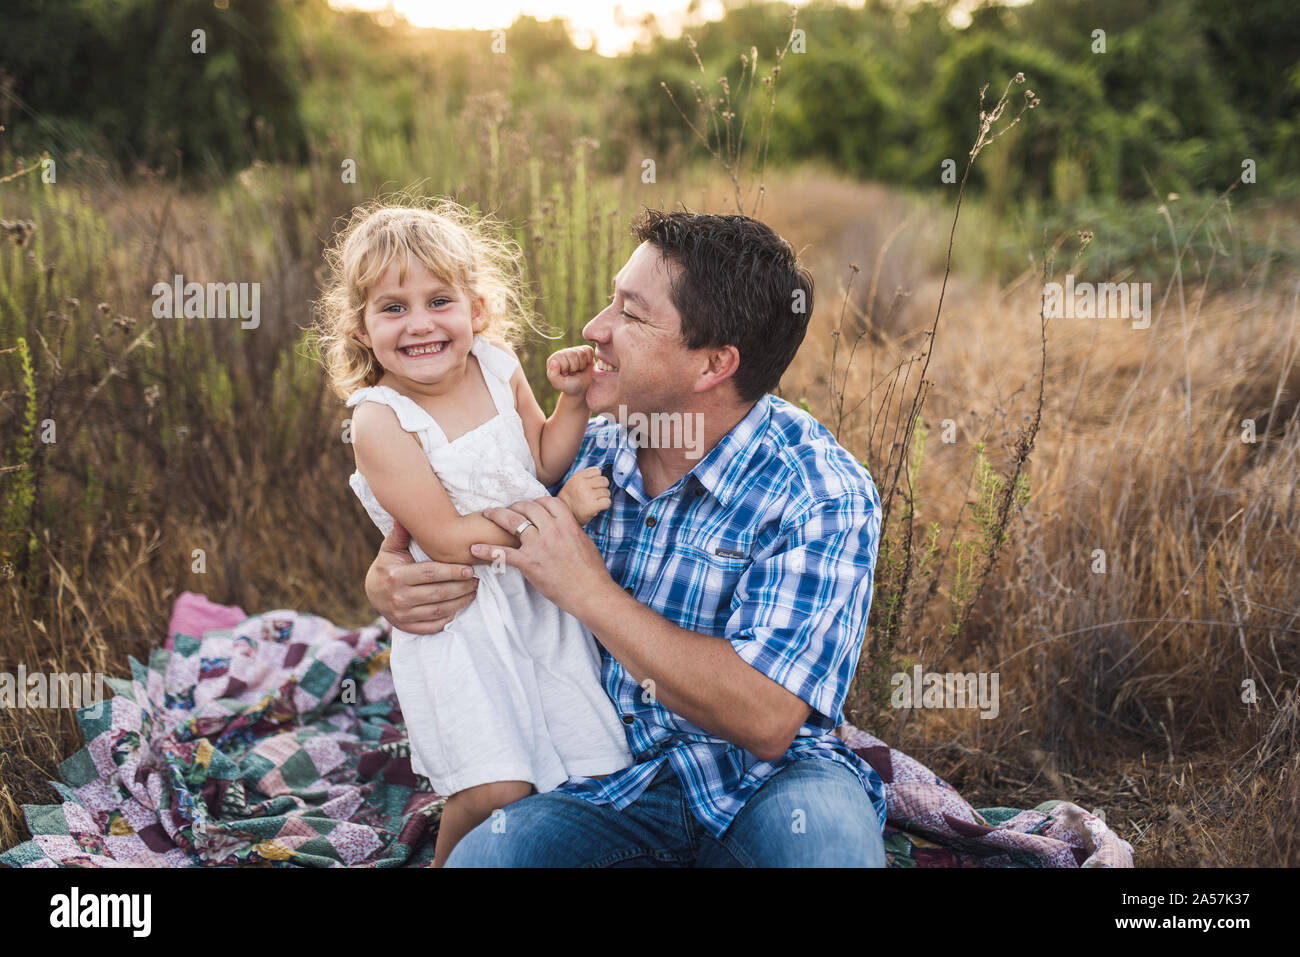 Laughing dad and young daughter on patchwork quilt in a meadow Stock Photo